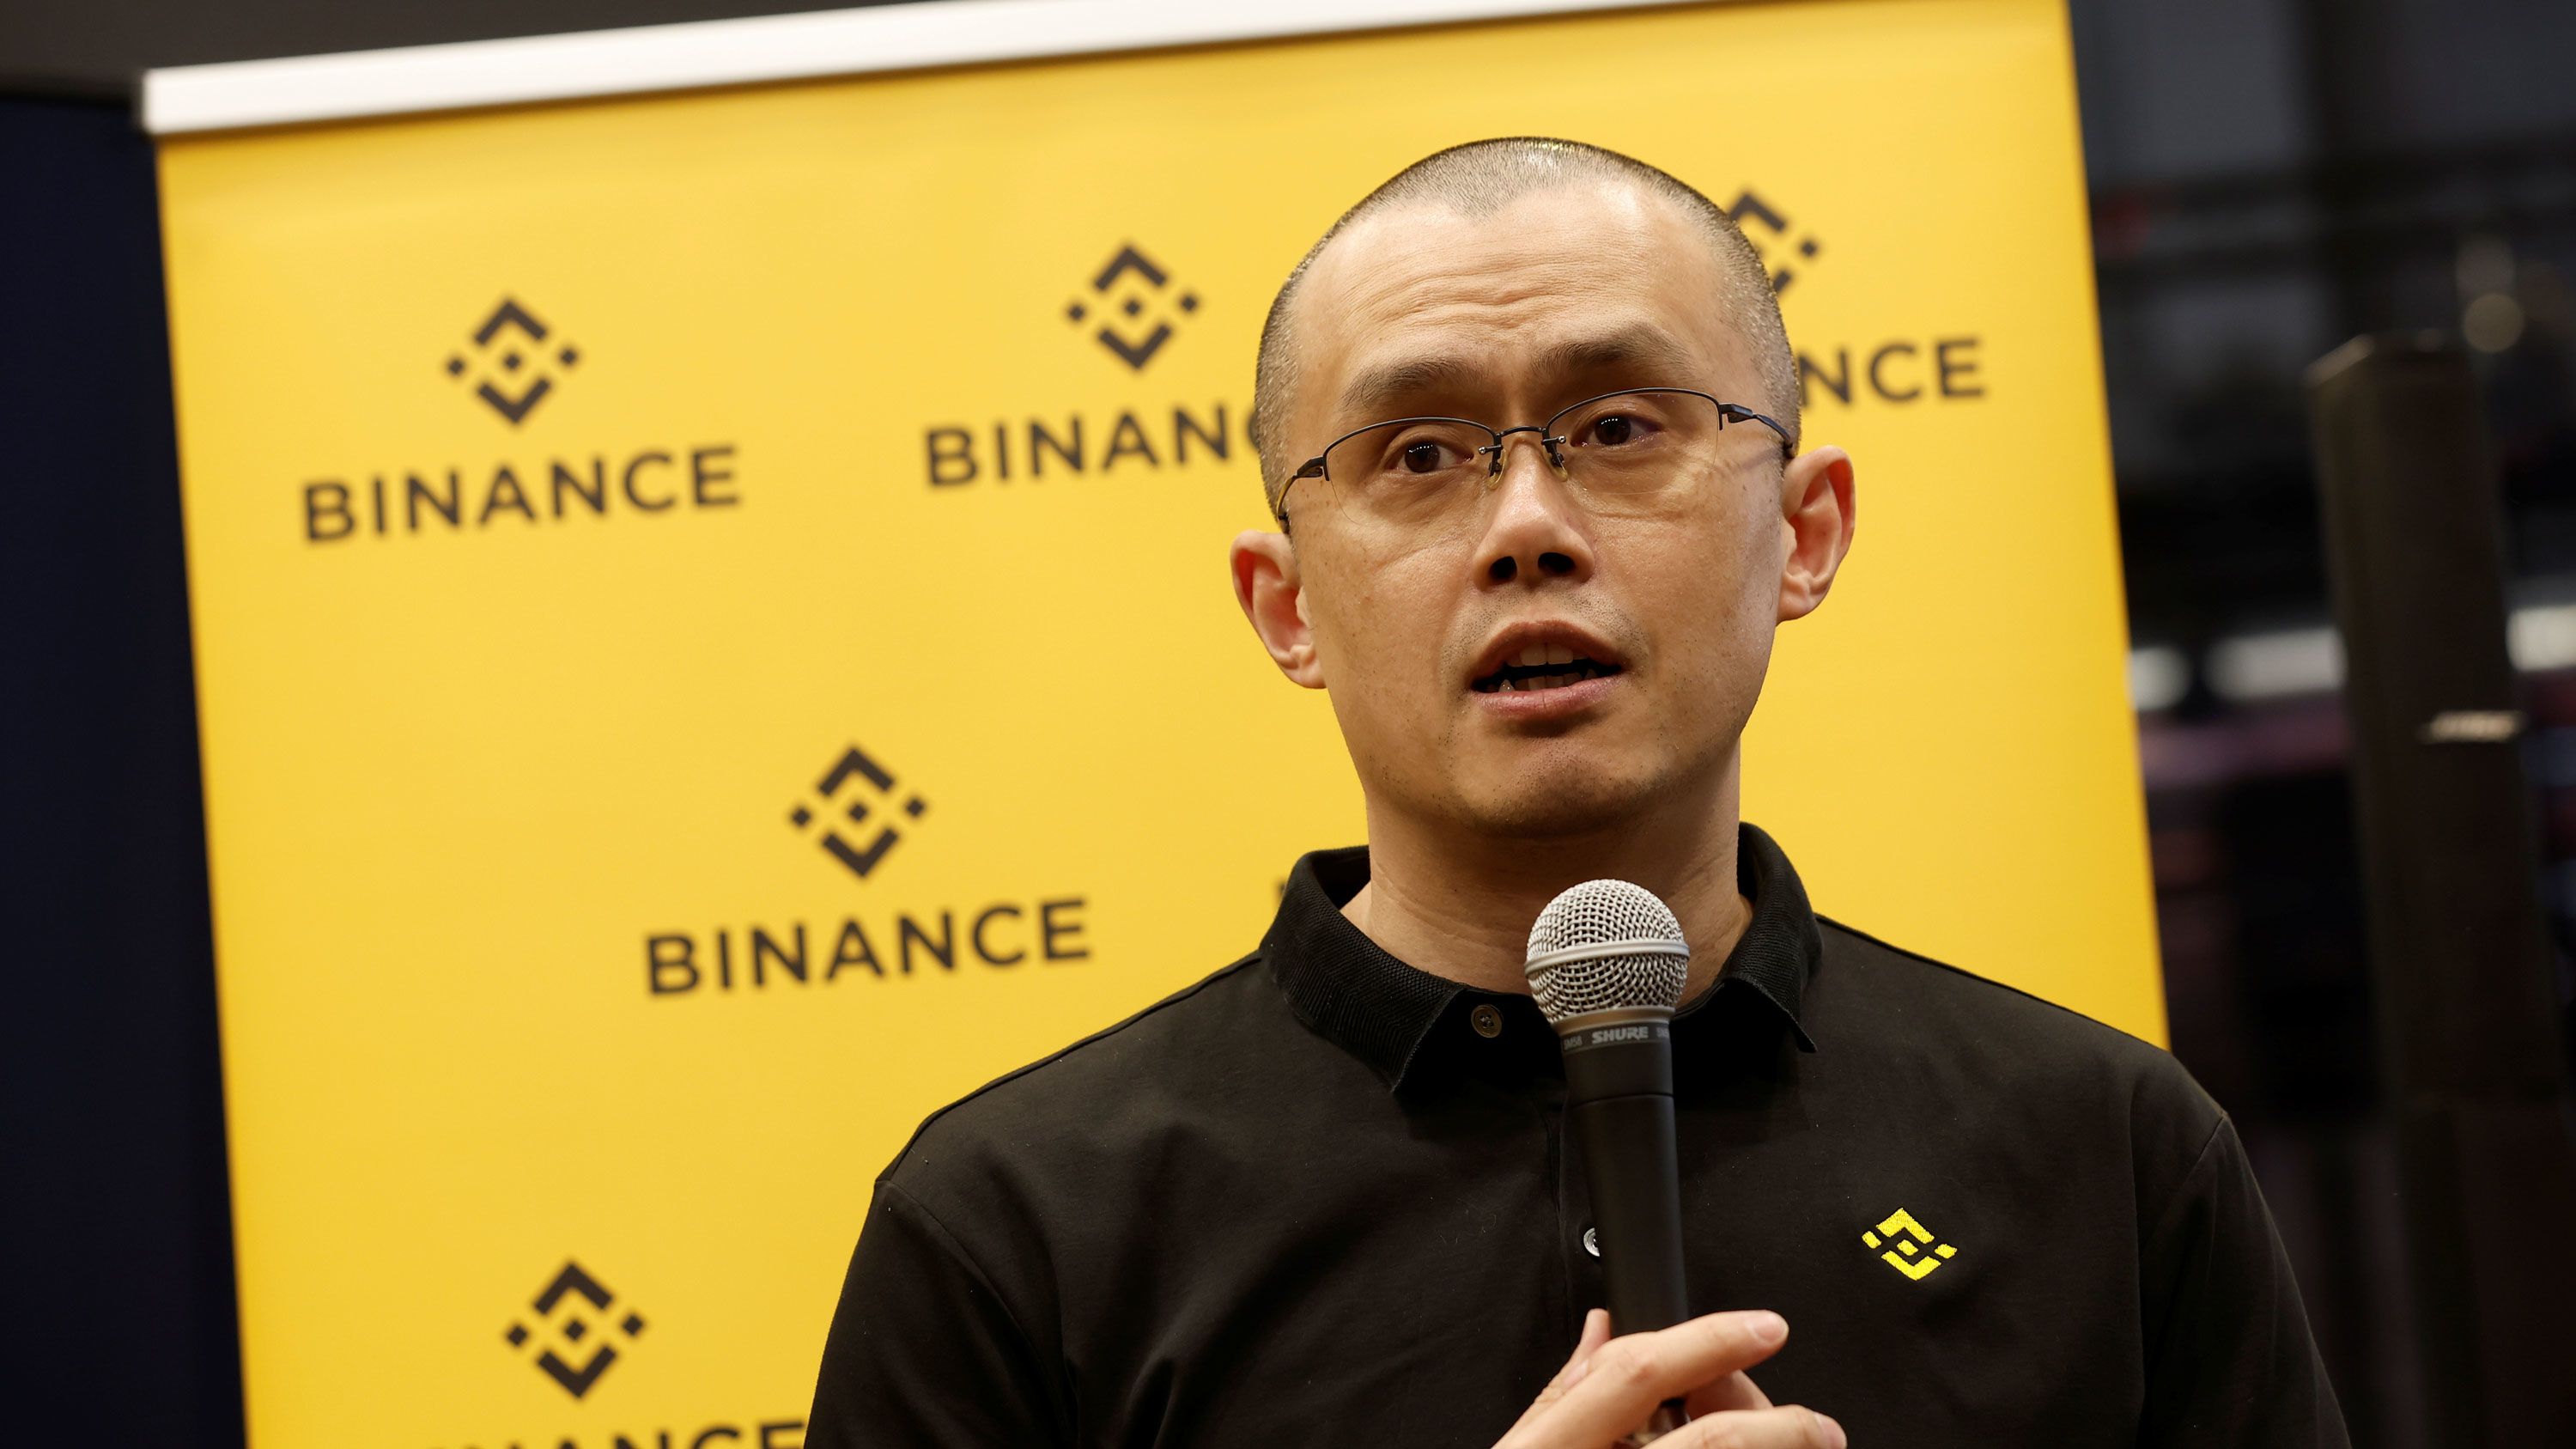 Binance's CEO and Executive Team - Team members and org chart | The Org